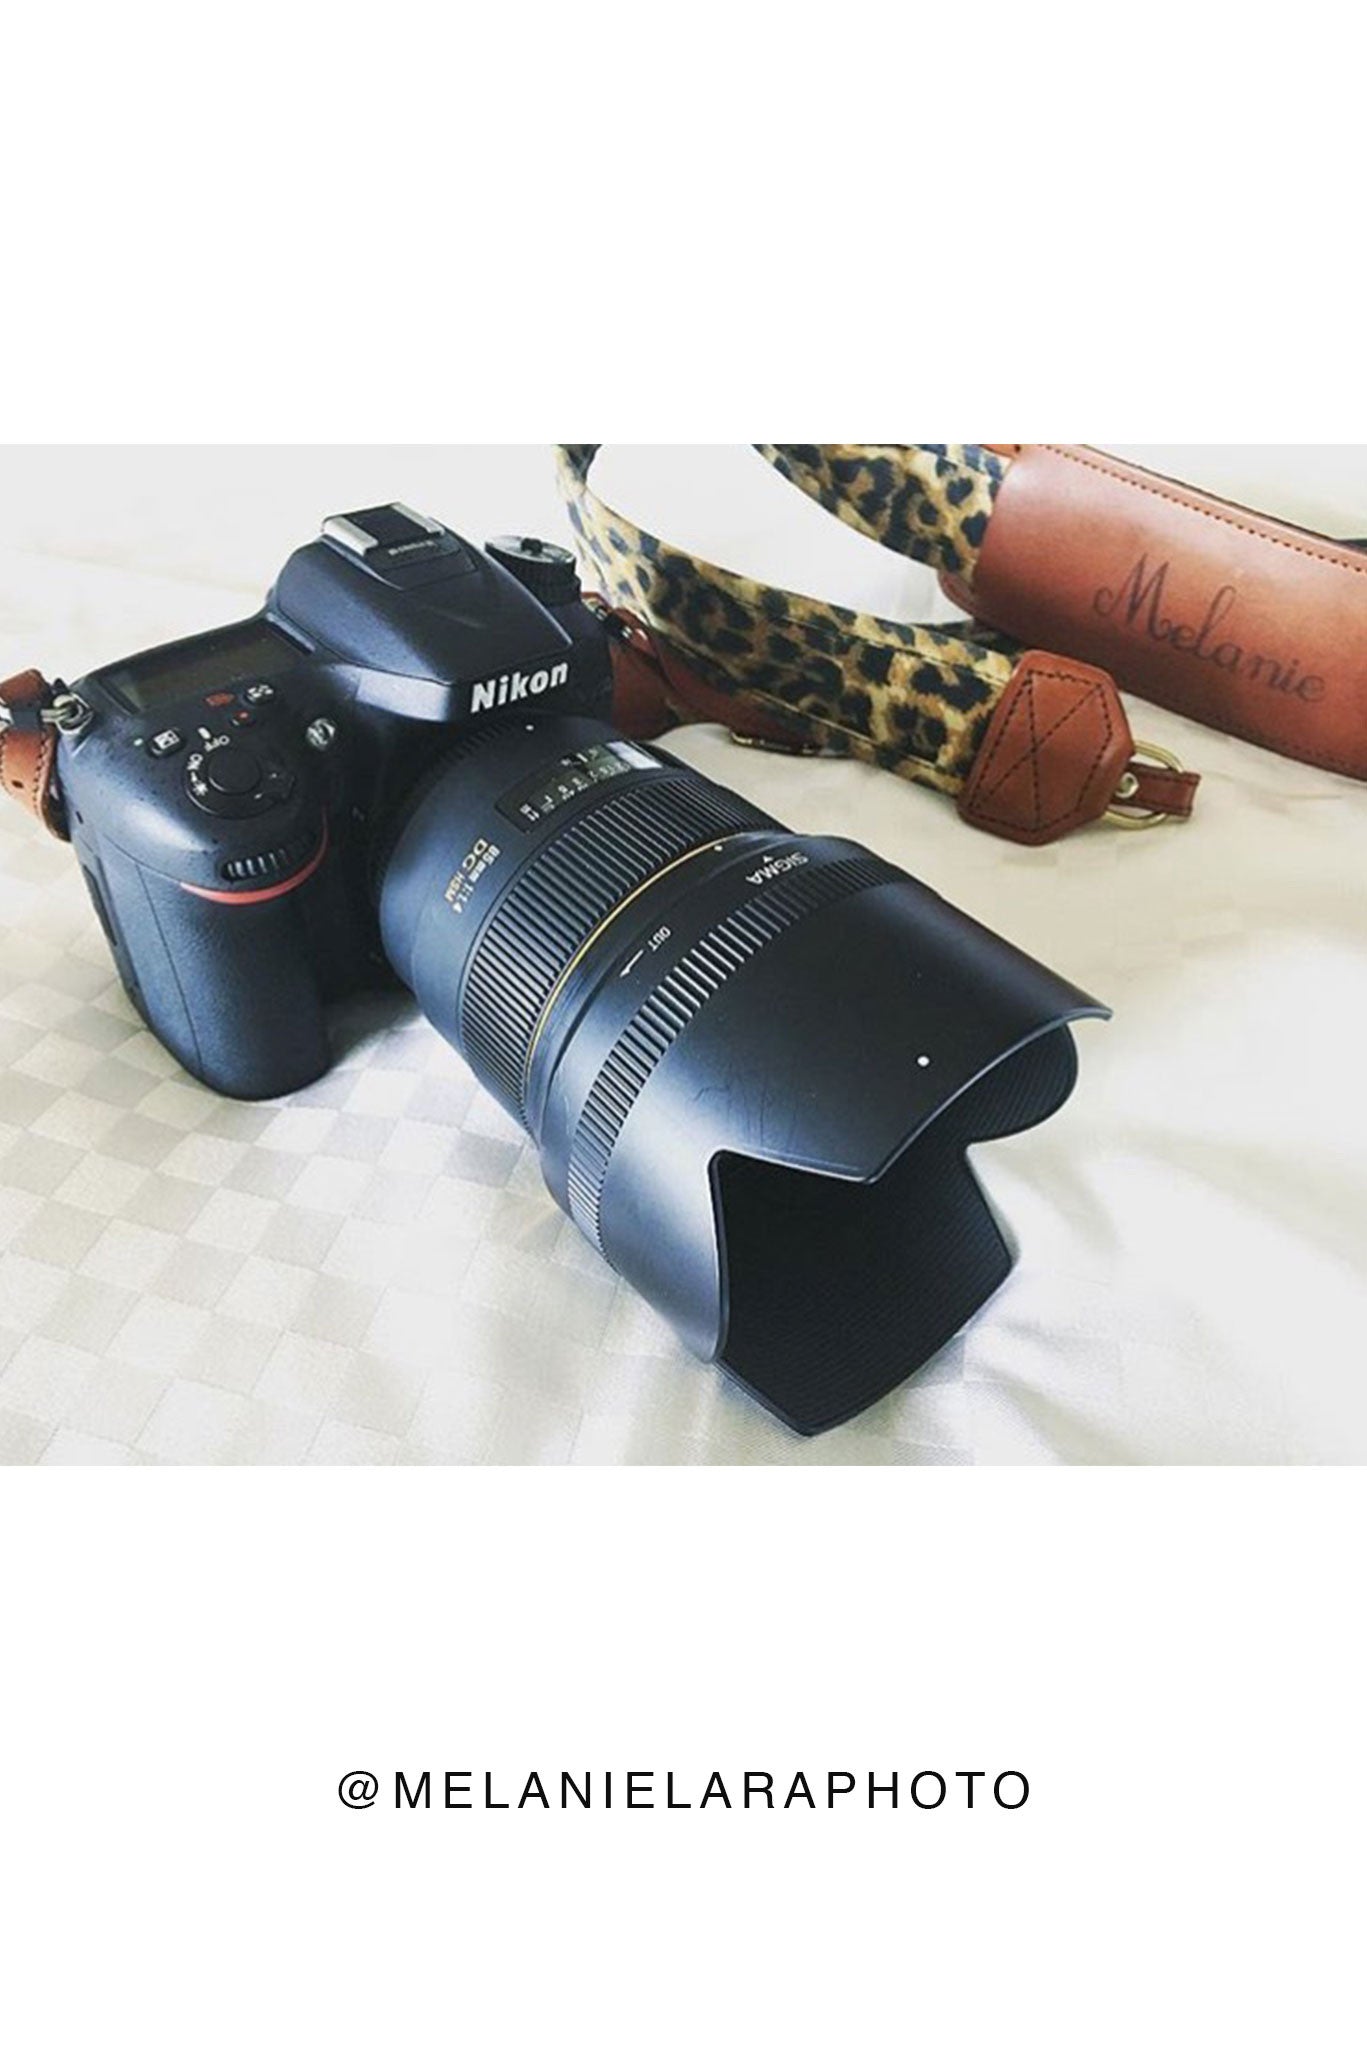 FOTO | Leopard Fotostrap - a leopard print canvas and genuine leather camera strap that can be personalized with a monogram or business logo, making it the perfect personalized gift! 